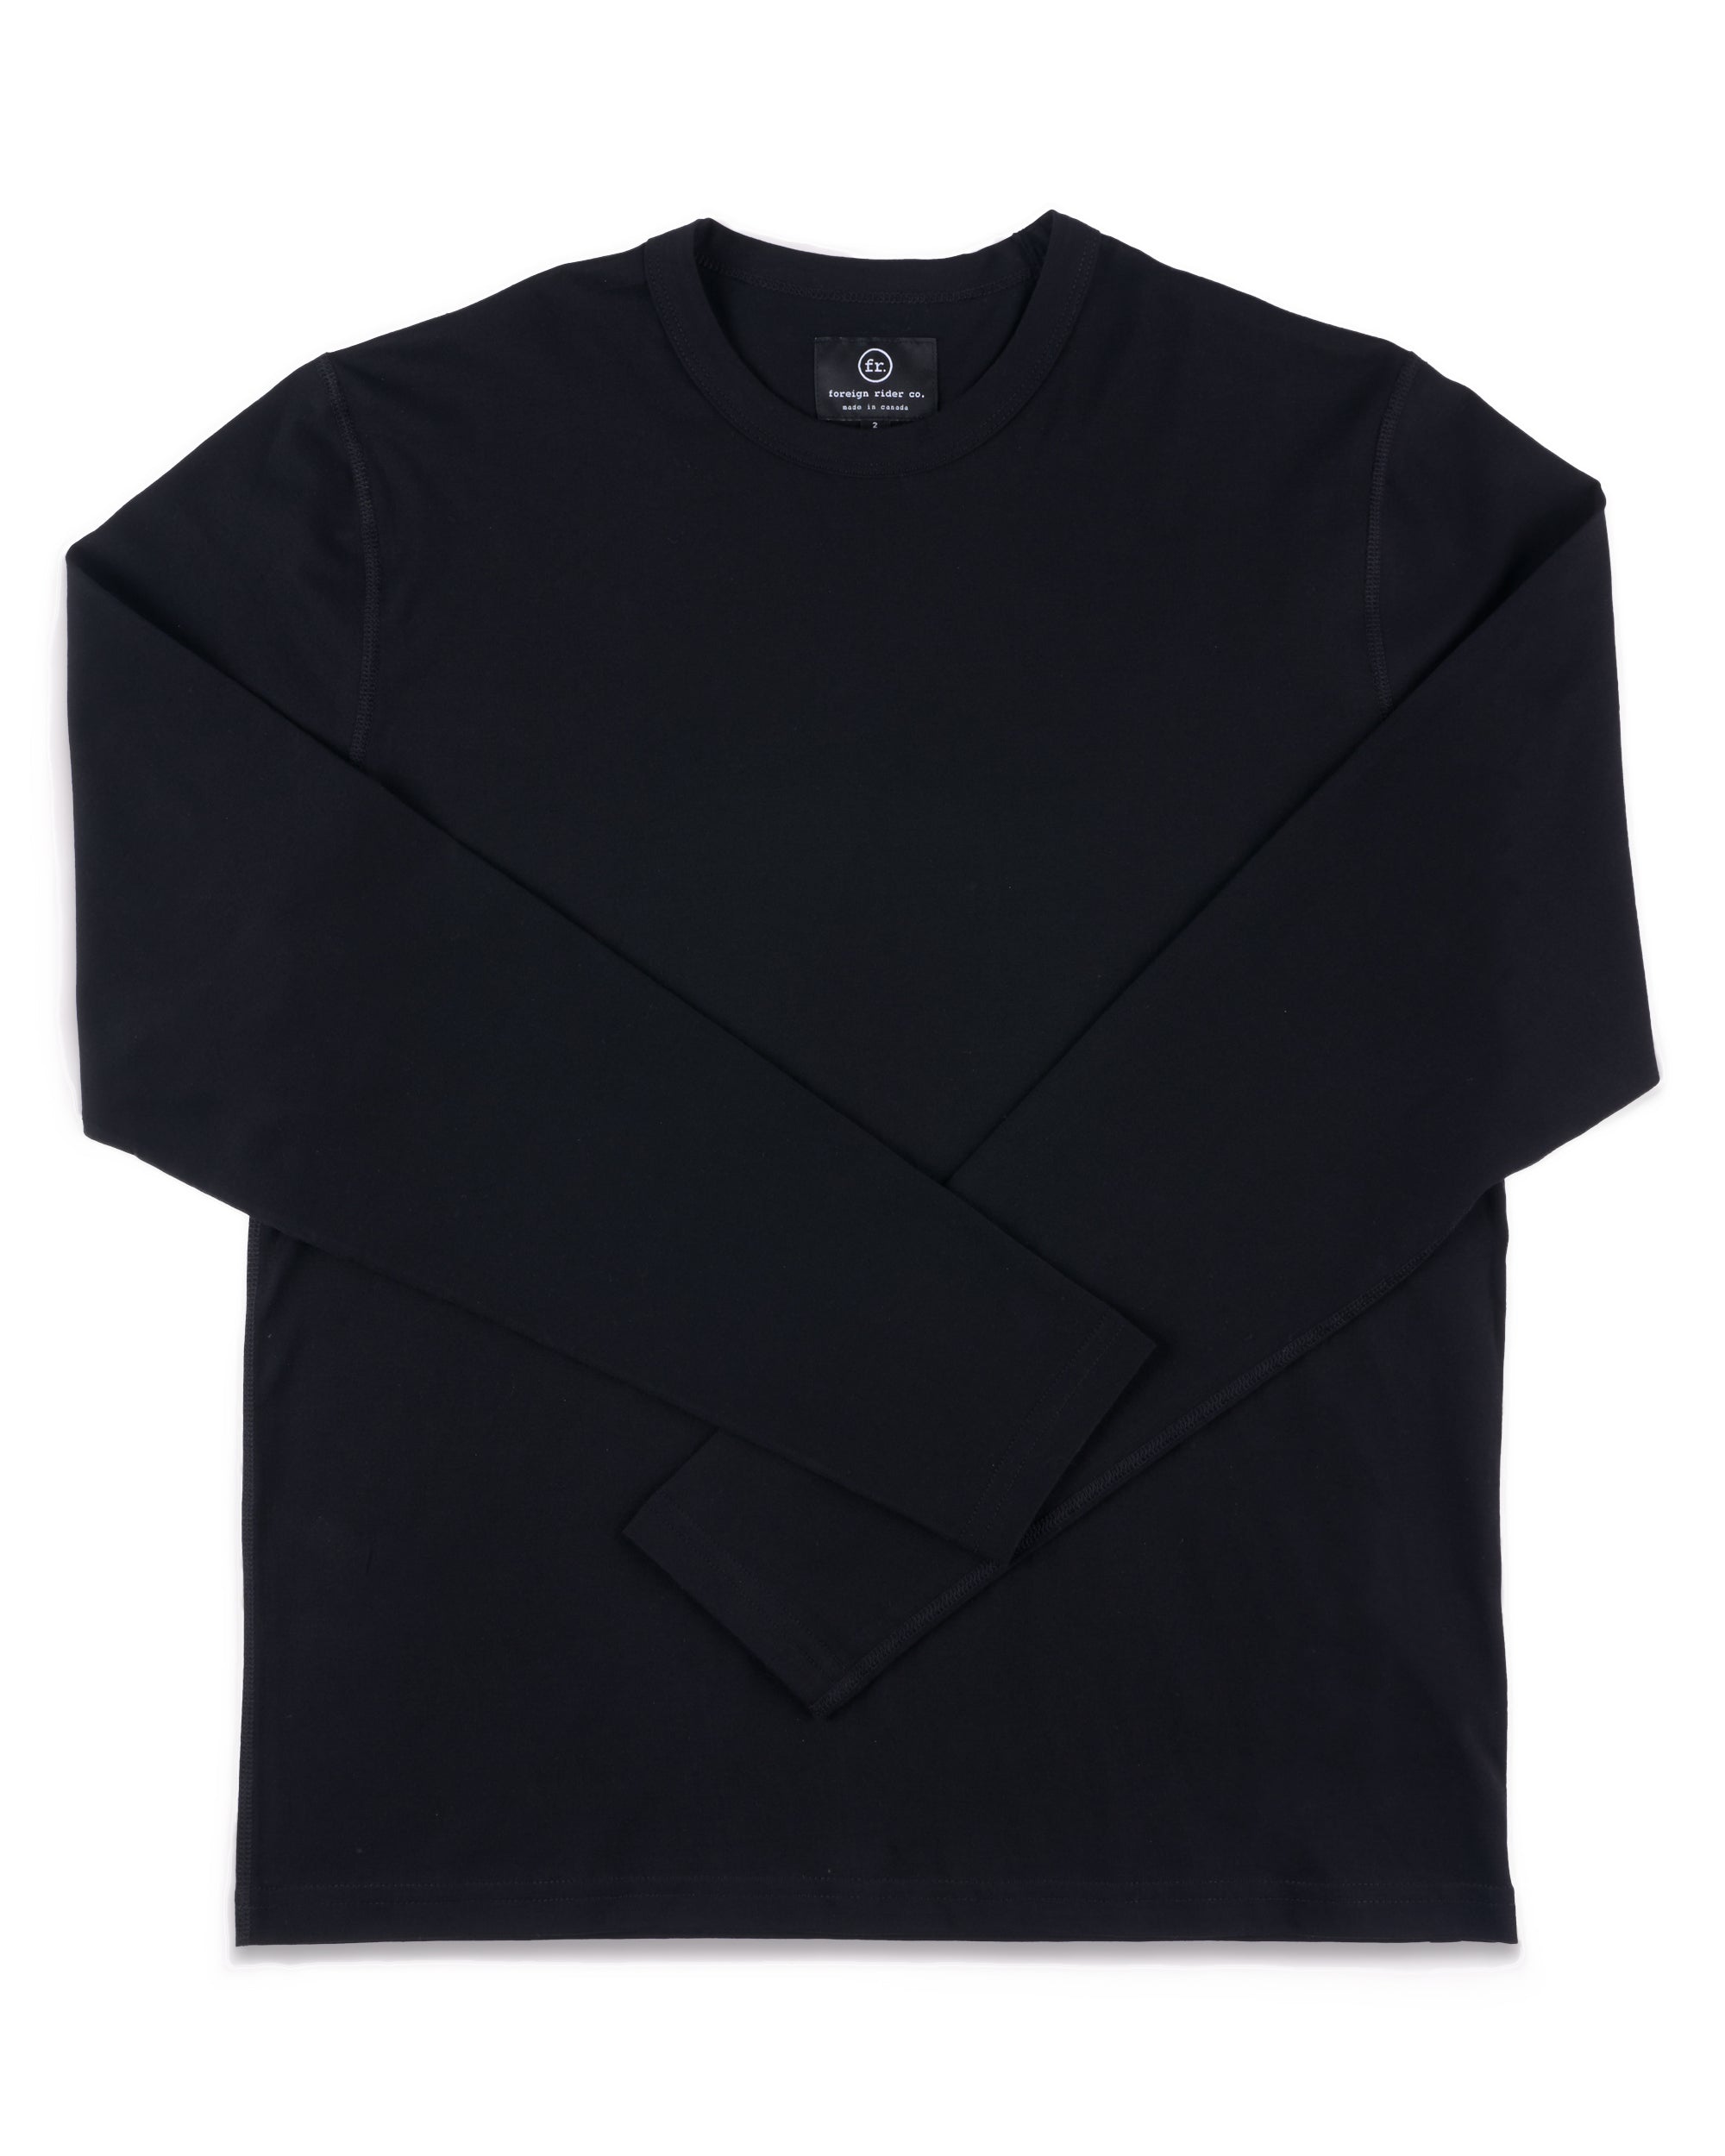 Supima LS T-Shirt Black - Foreign Rider Co.